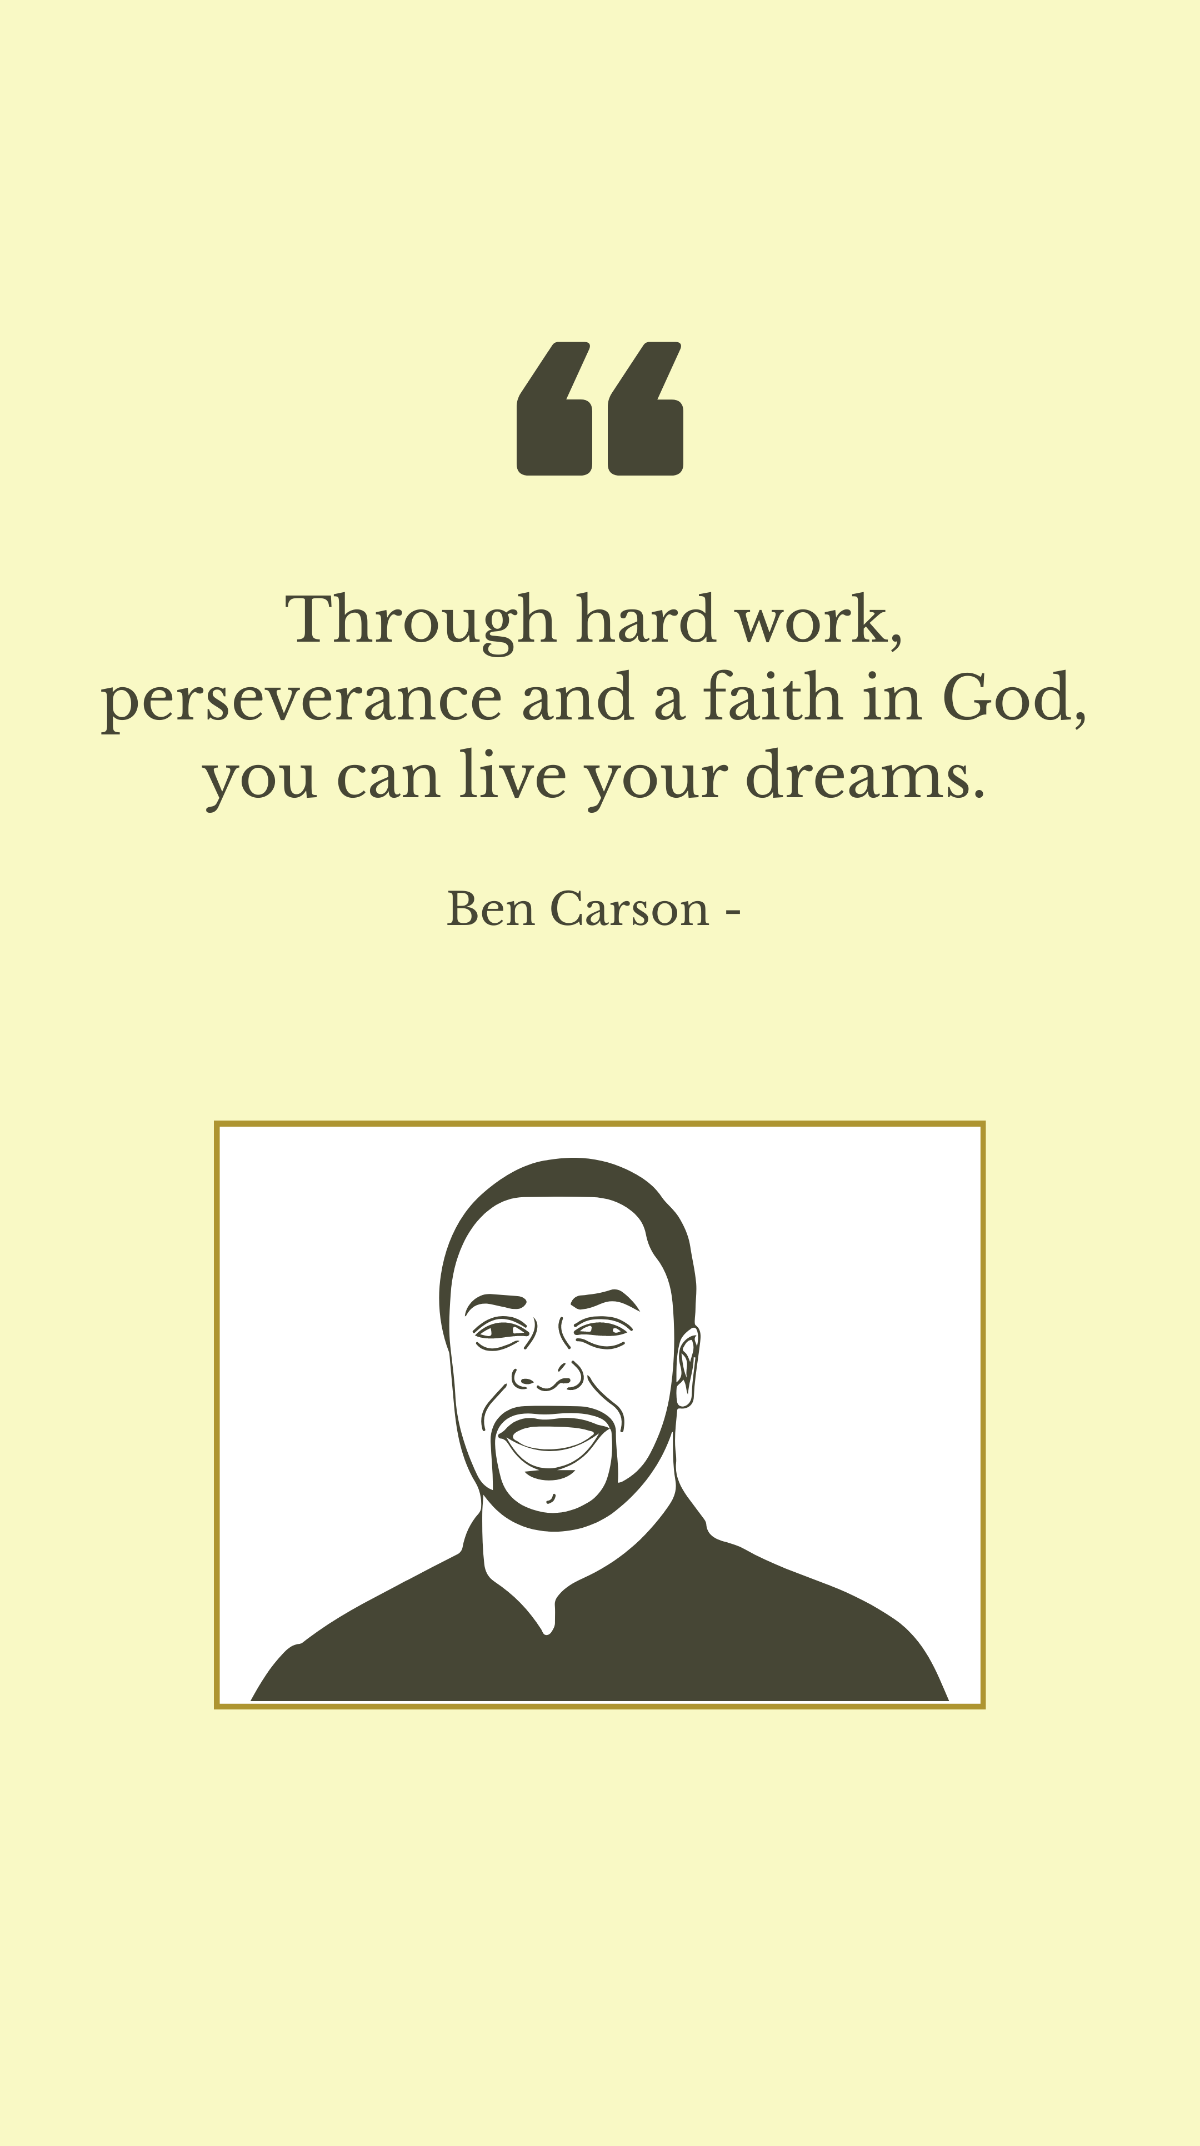 Ben Carson - Through hard work, perseverance and a faith in God, you can live your dreams.